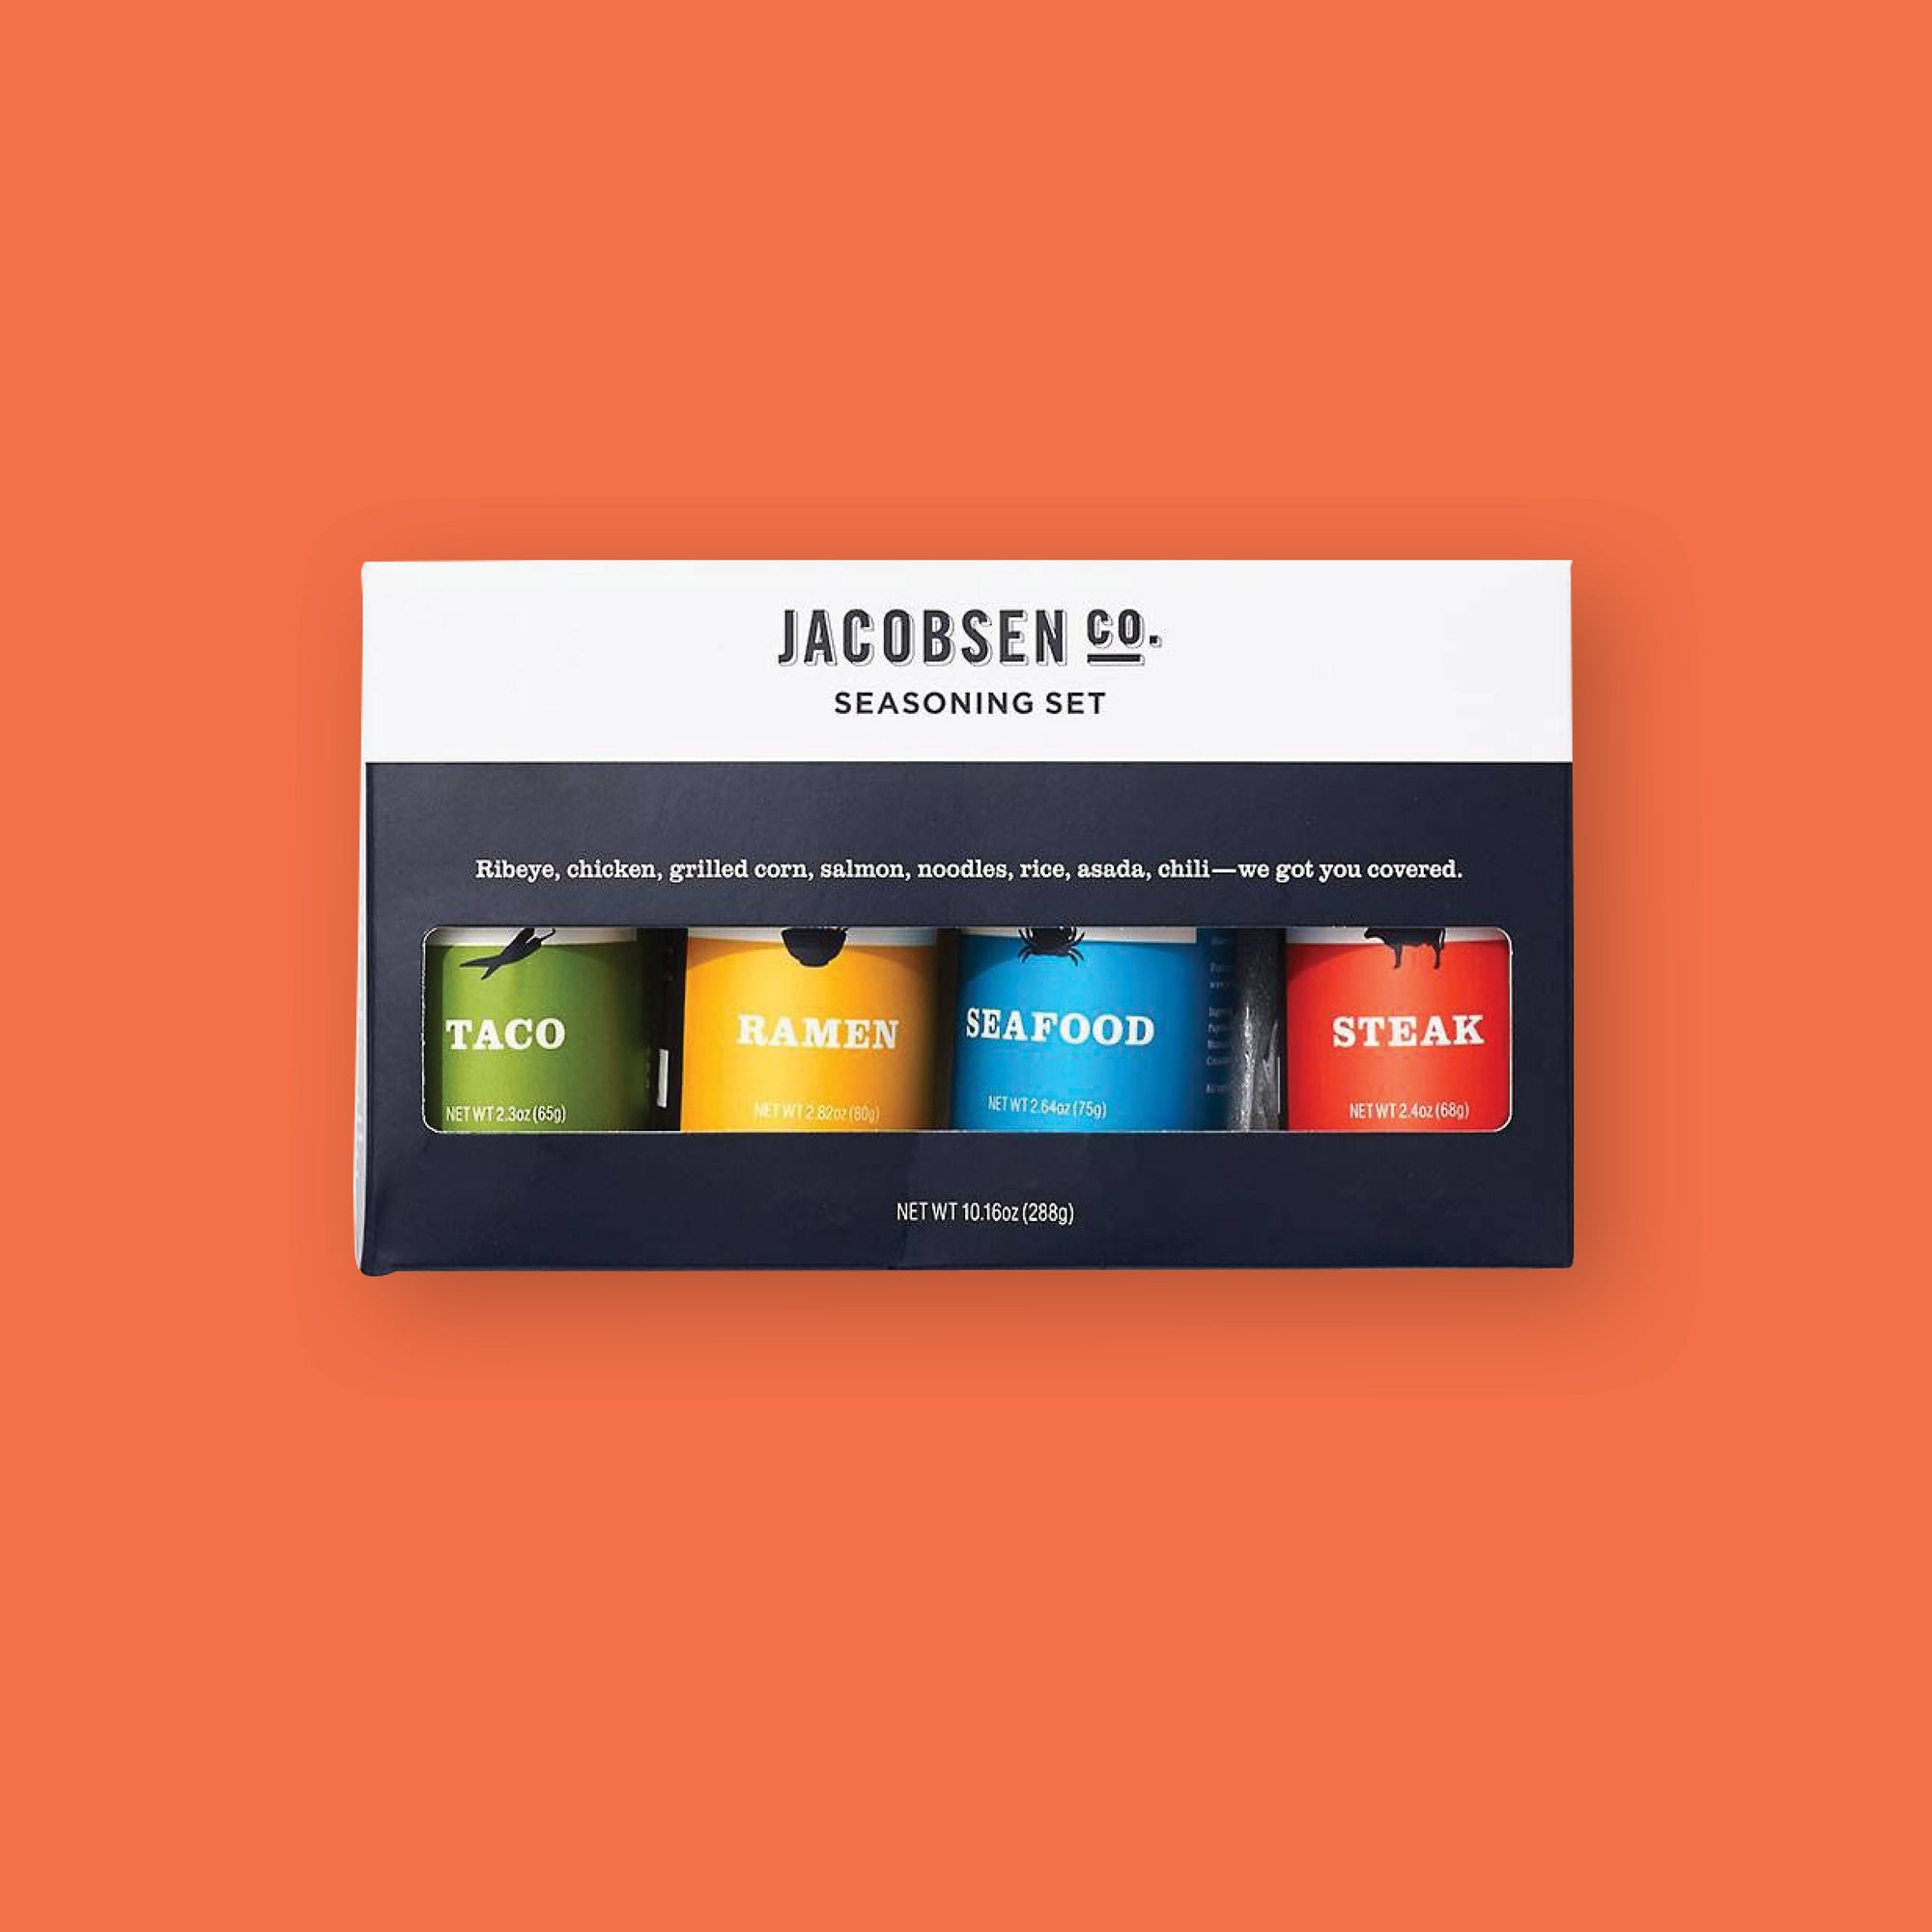 On an orangey-red background sits a box and four jars. The box is black and white with a see-thru window. It says "JACOBSEN CO. SEASON SET" in black, call caps block font. Under it says "Ribeye, chicken, grilled corn, salmon, noodles, rice, asada, chili - we got you covered." in white, sreif font. The bottles are seasons of "Taco" in green label, "Ramen" in yellow label, "Seafood" in blue label, and "Steak" in red label. Each is 2.40z(68g)